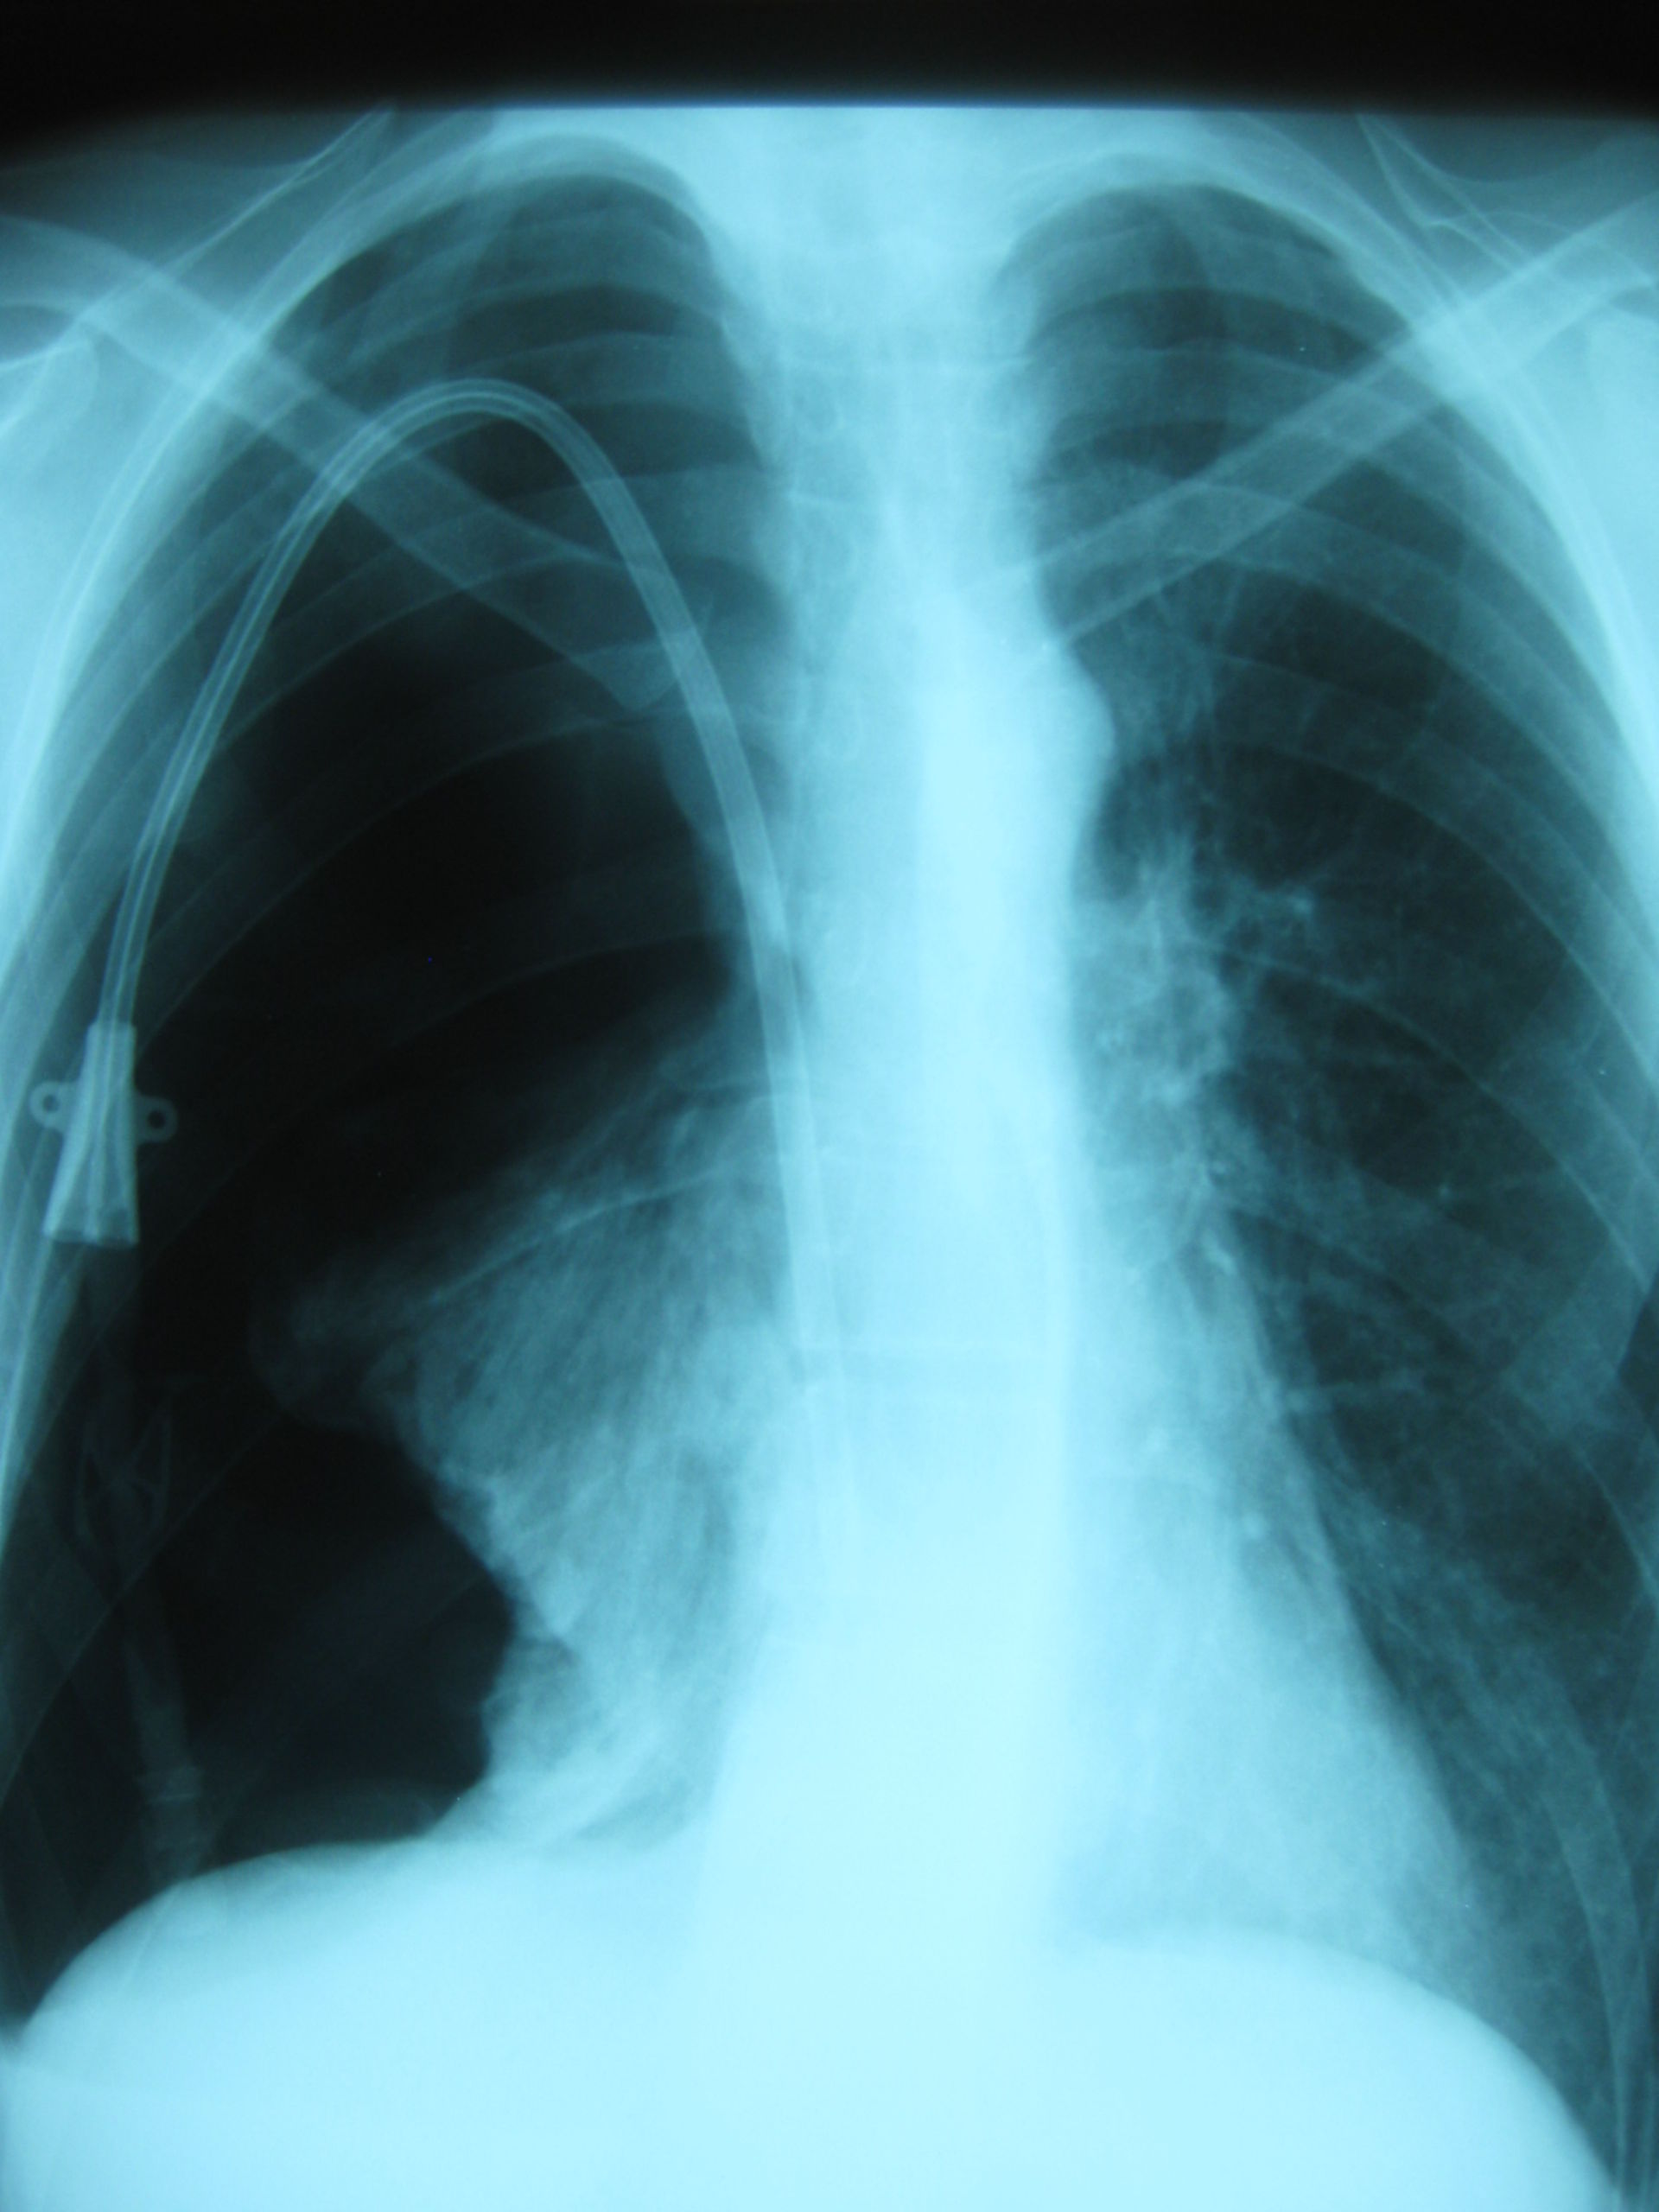 Pneumothorax on the right side